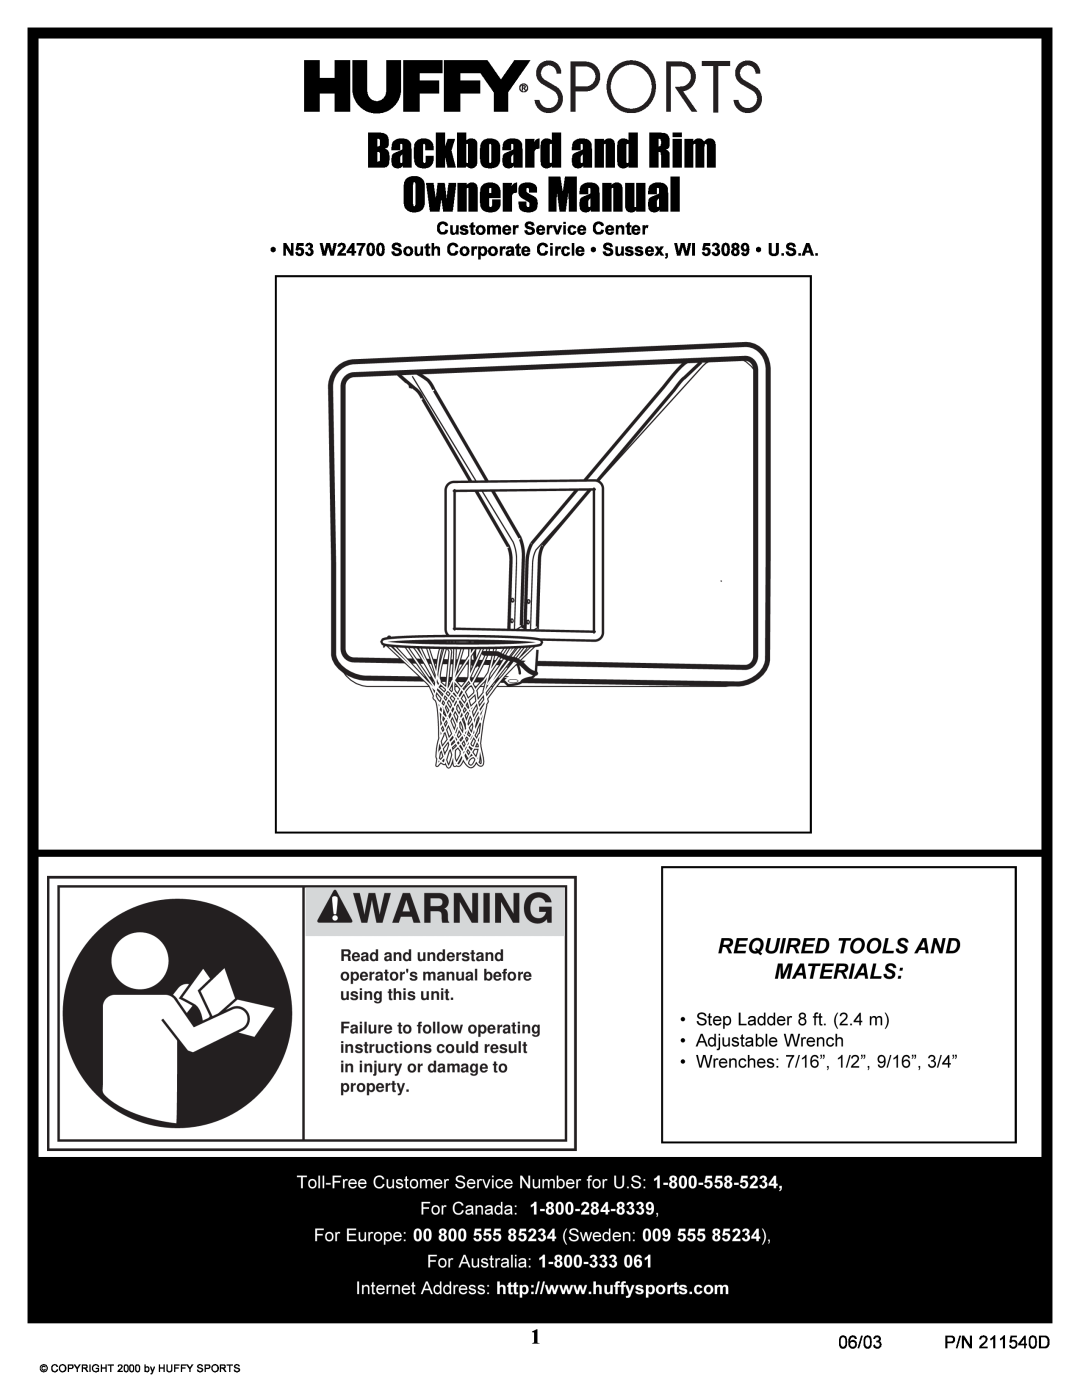 Huffy manual Backboard and Rim Owners Manual, Required Tools And Materials, COPYRIGHT 2000 by HUFFY SPORTS 